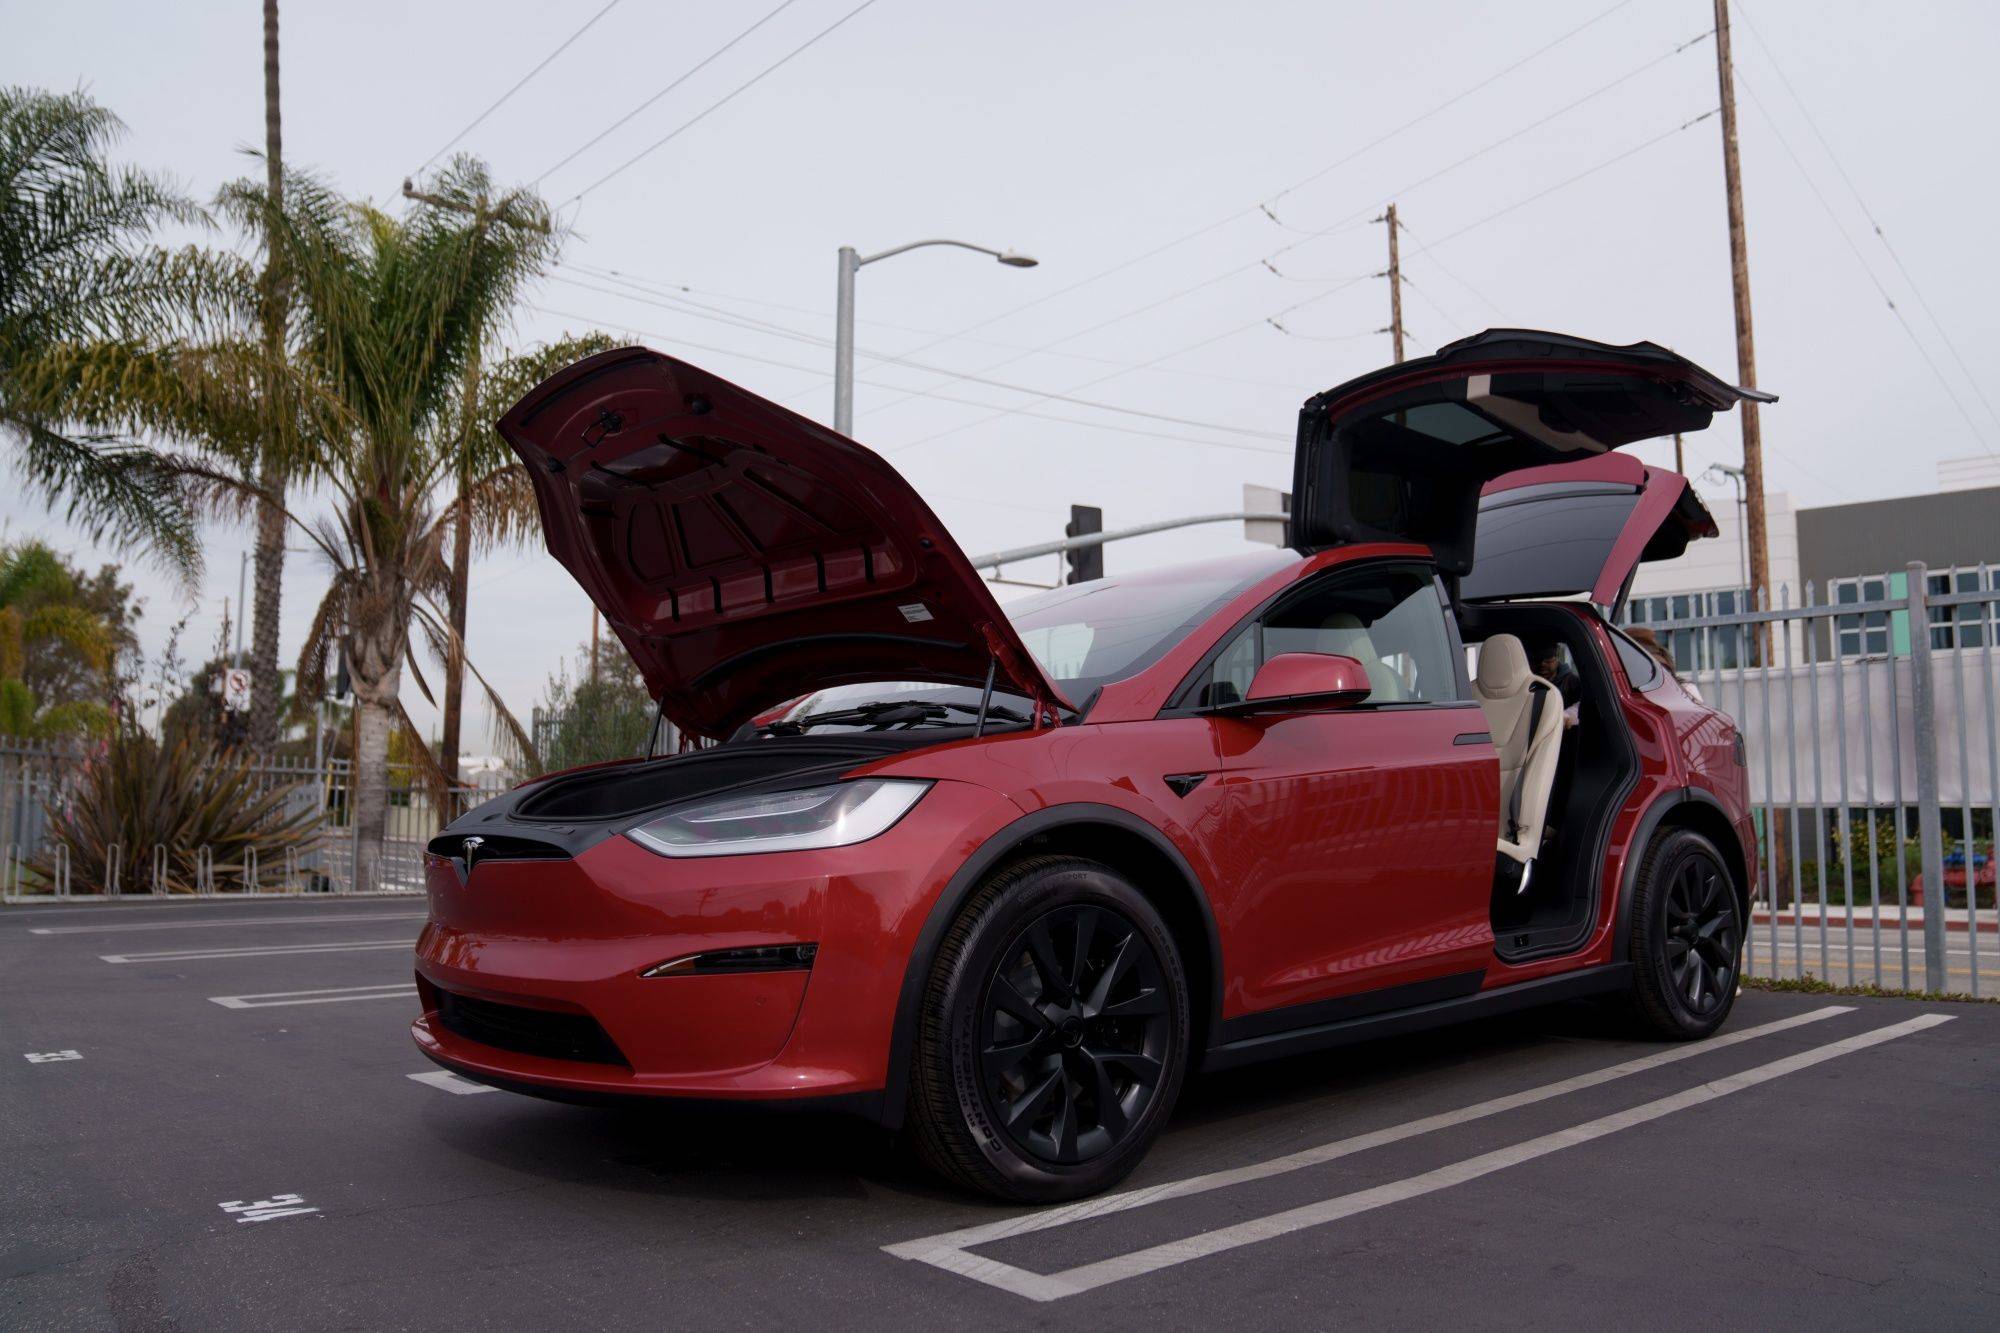 ‘I feel like I got duped' Tesla price drop angers current owners The